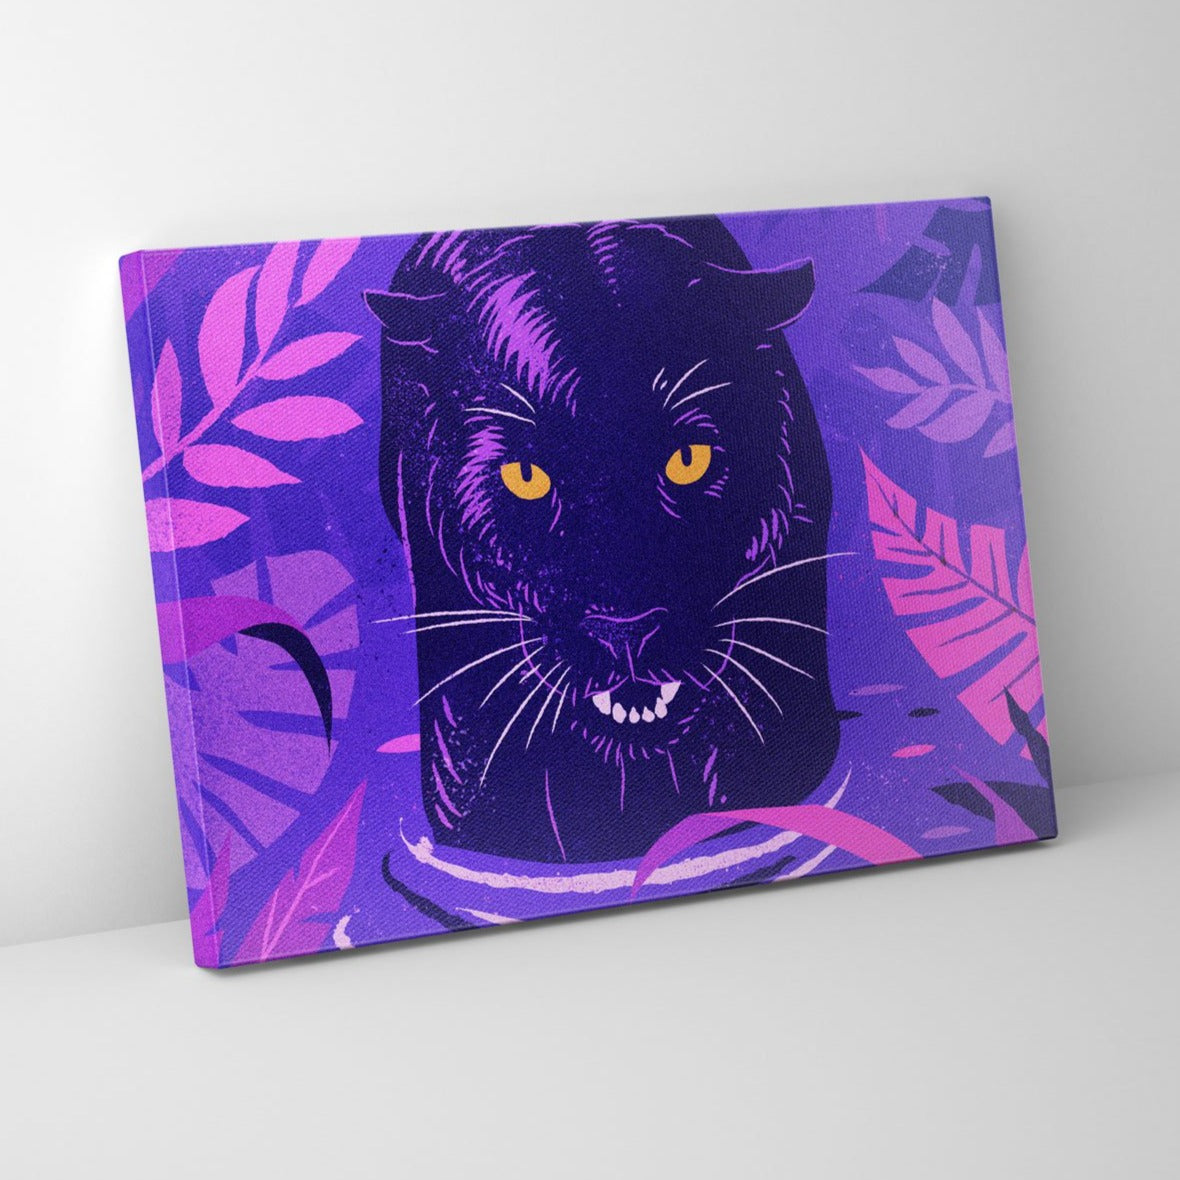 Neon Panther Canvas Sets